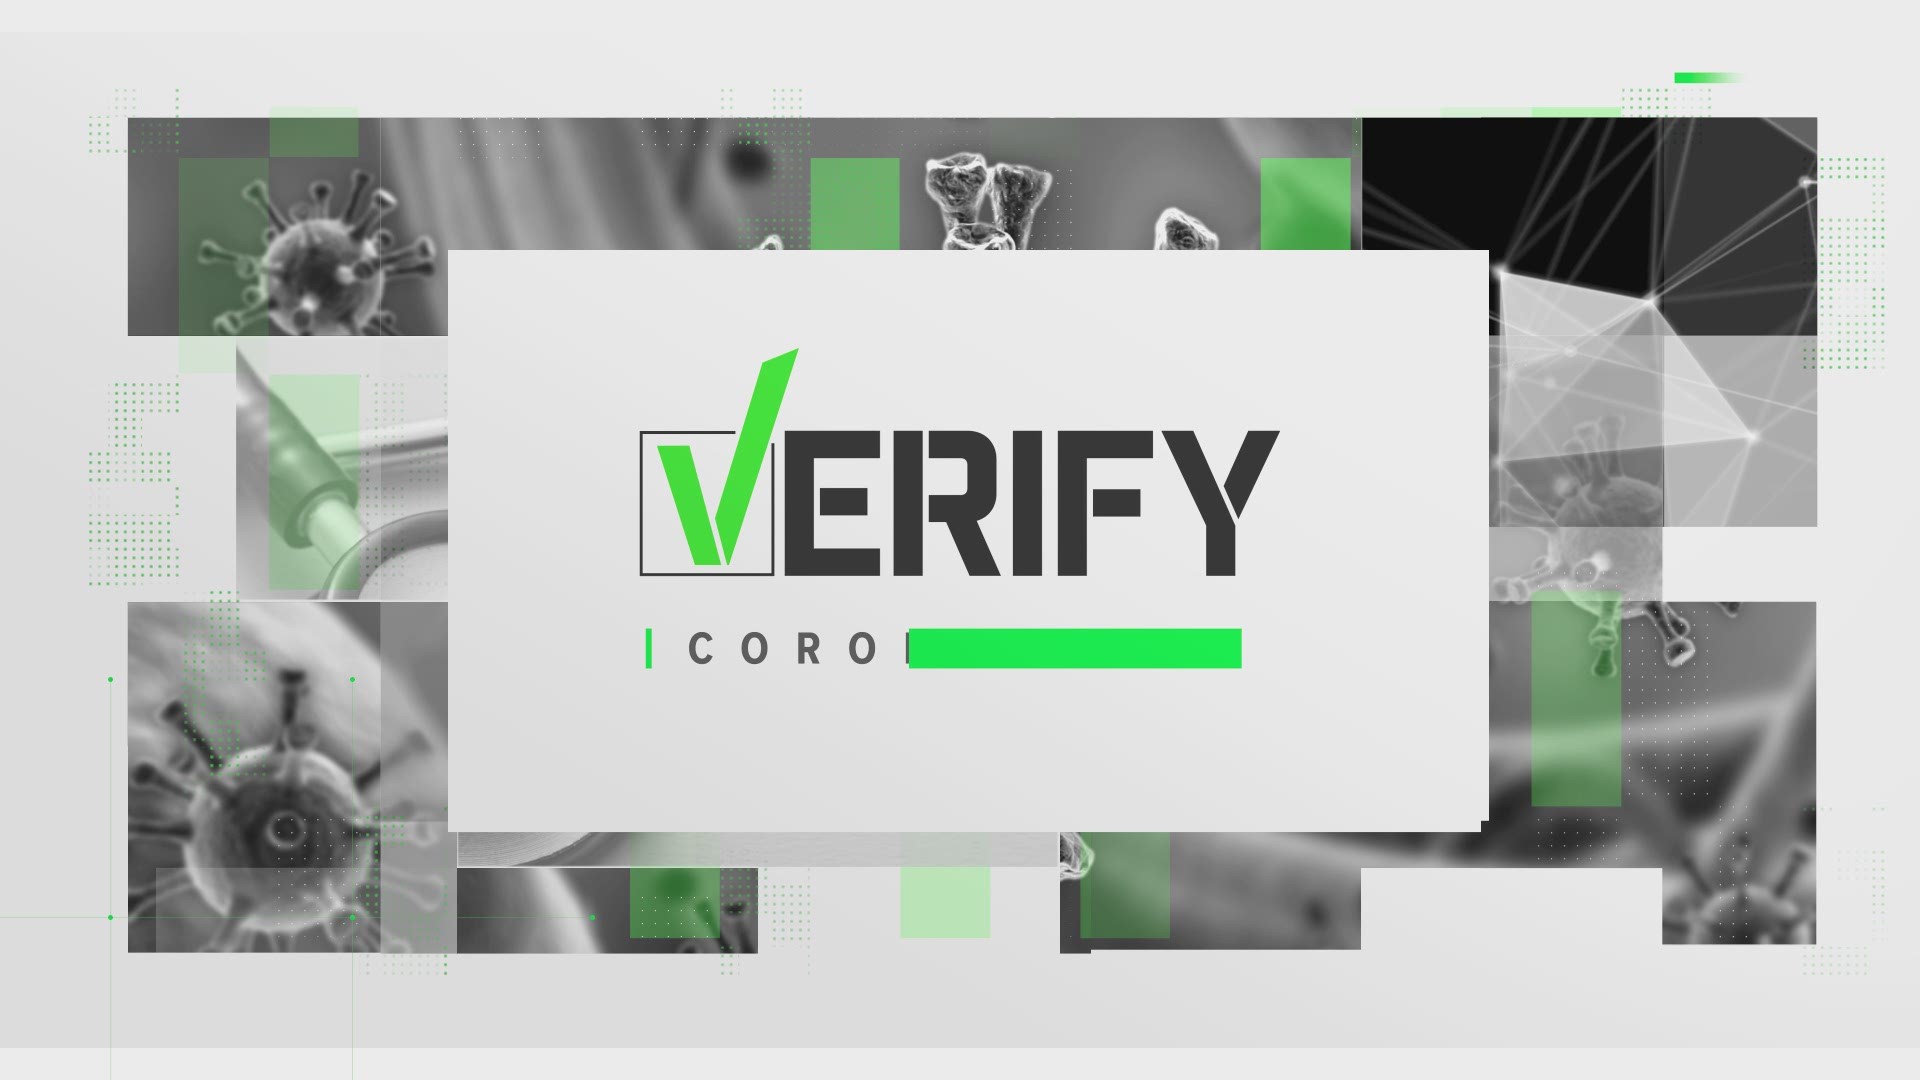 The Verify Team is looking into whether it's legal for businesses to turn down cash.